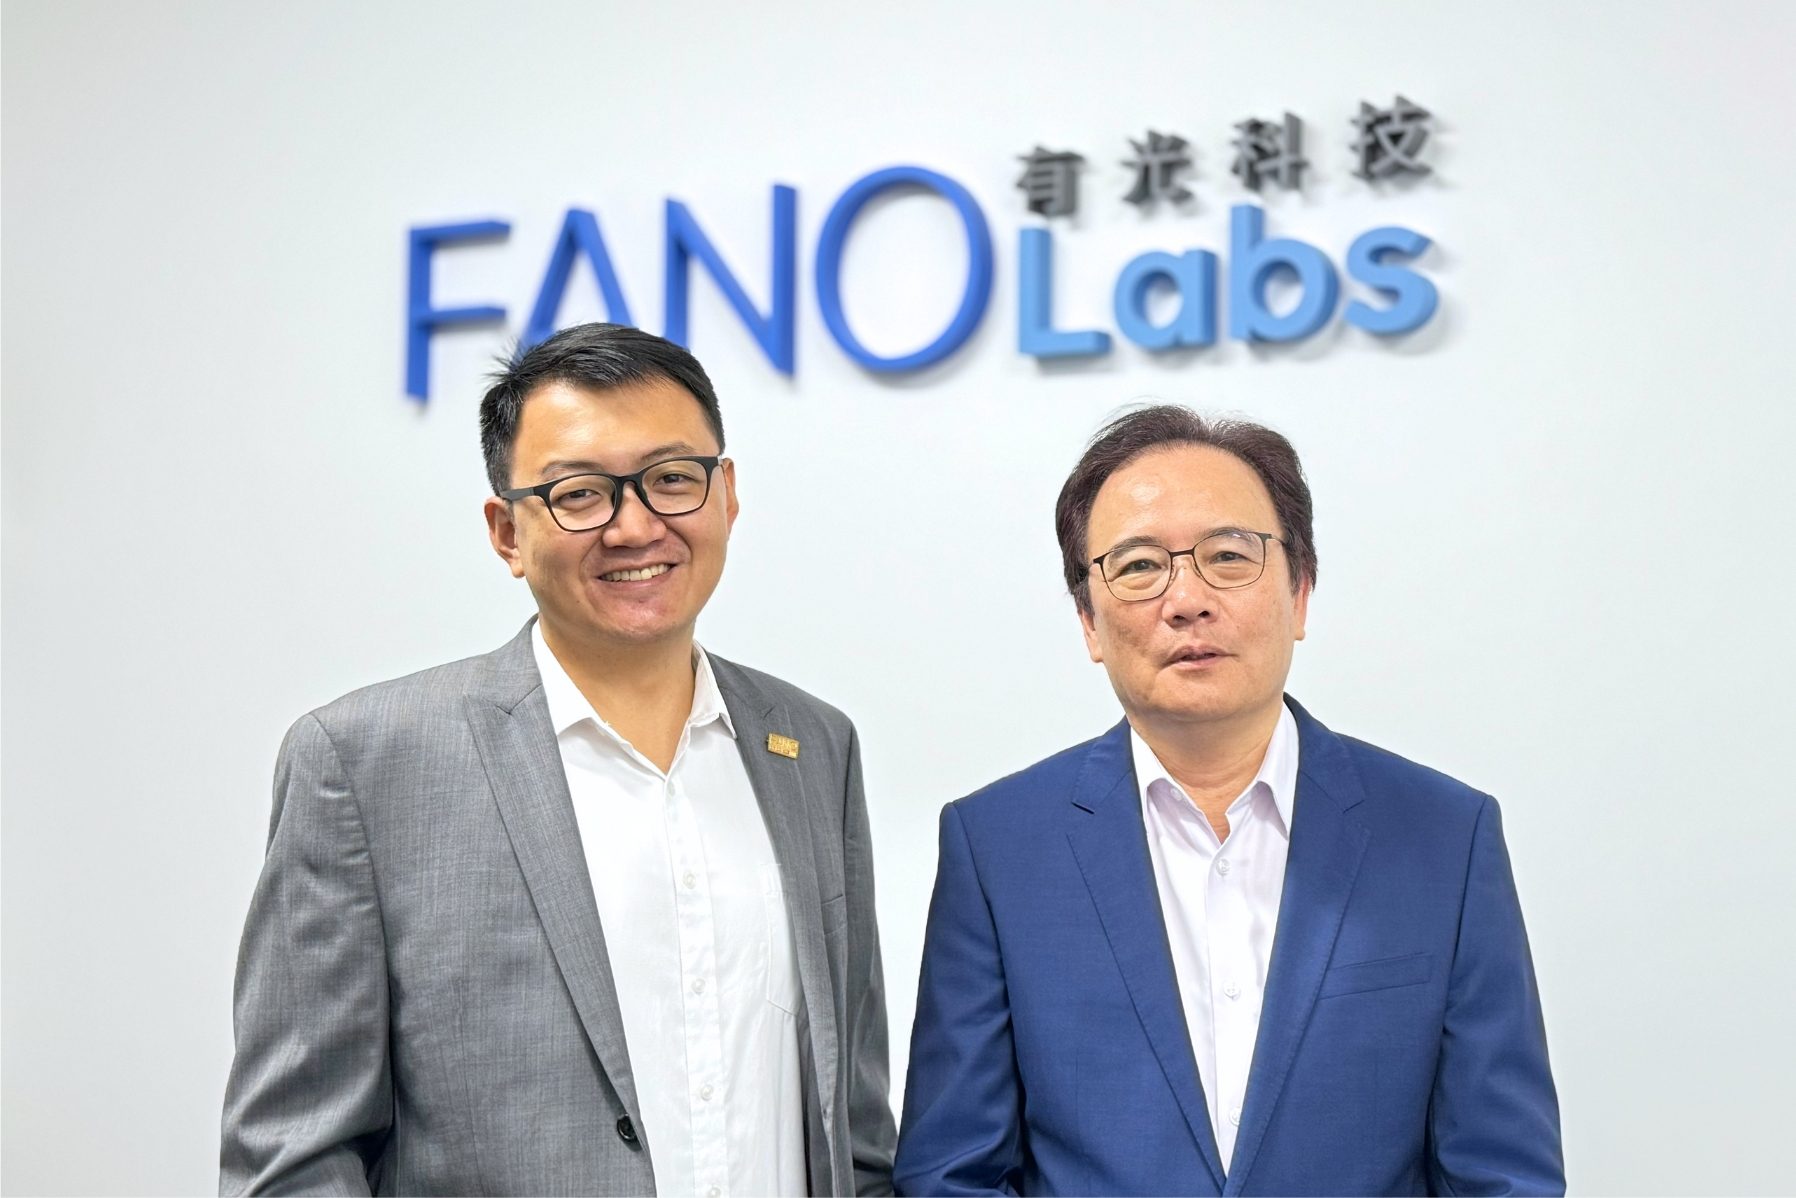 Hong Kong’s Fano Labs completes Series B round to fund APAC expansion